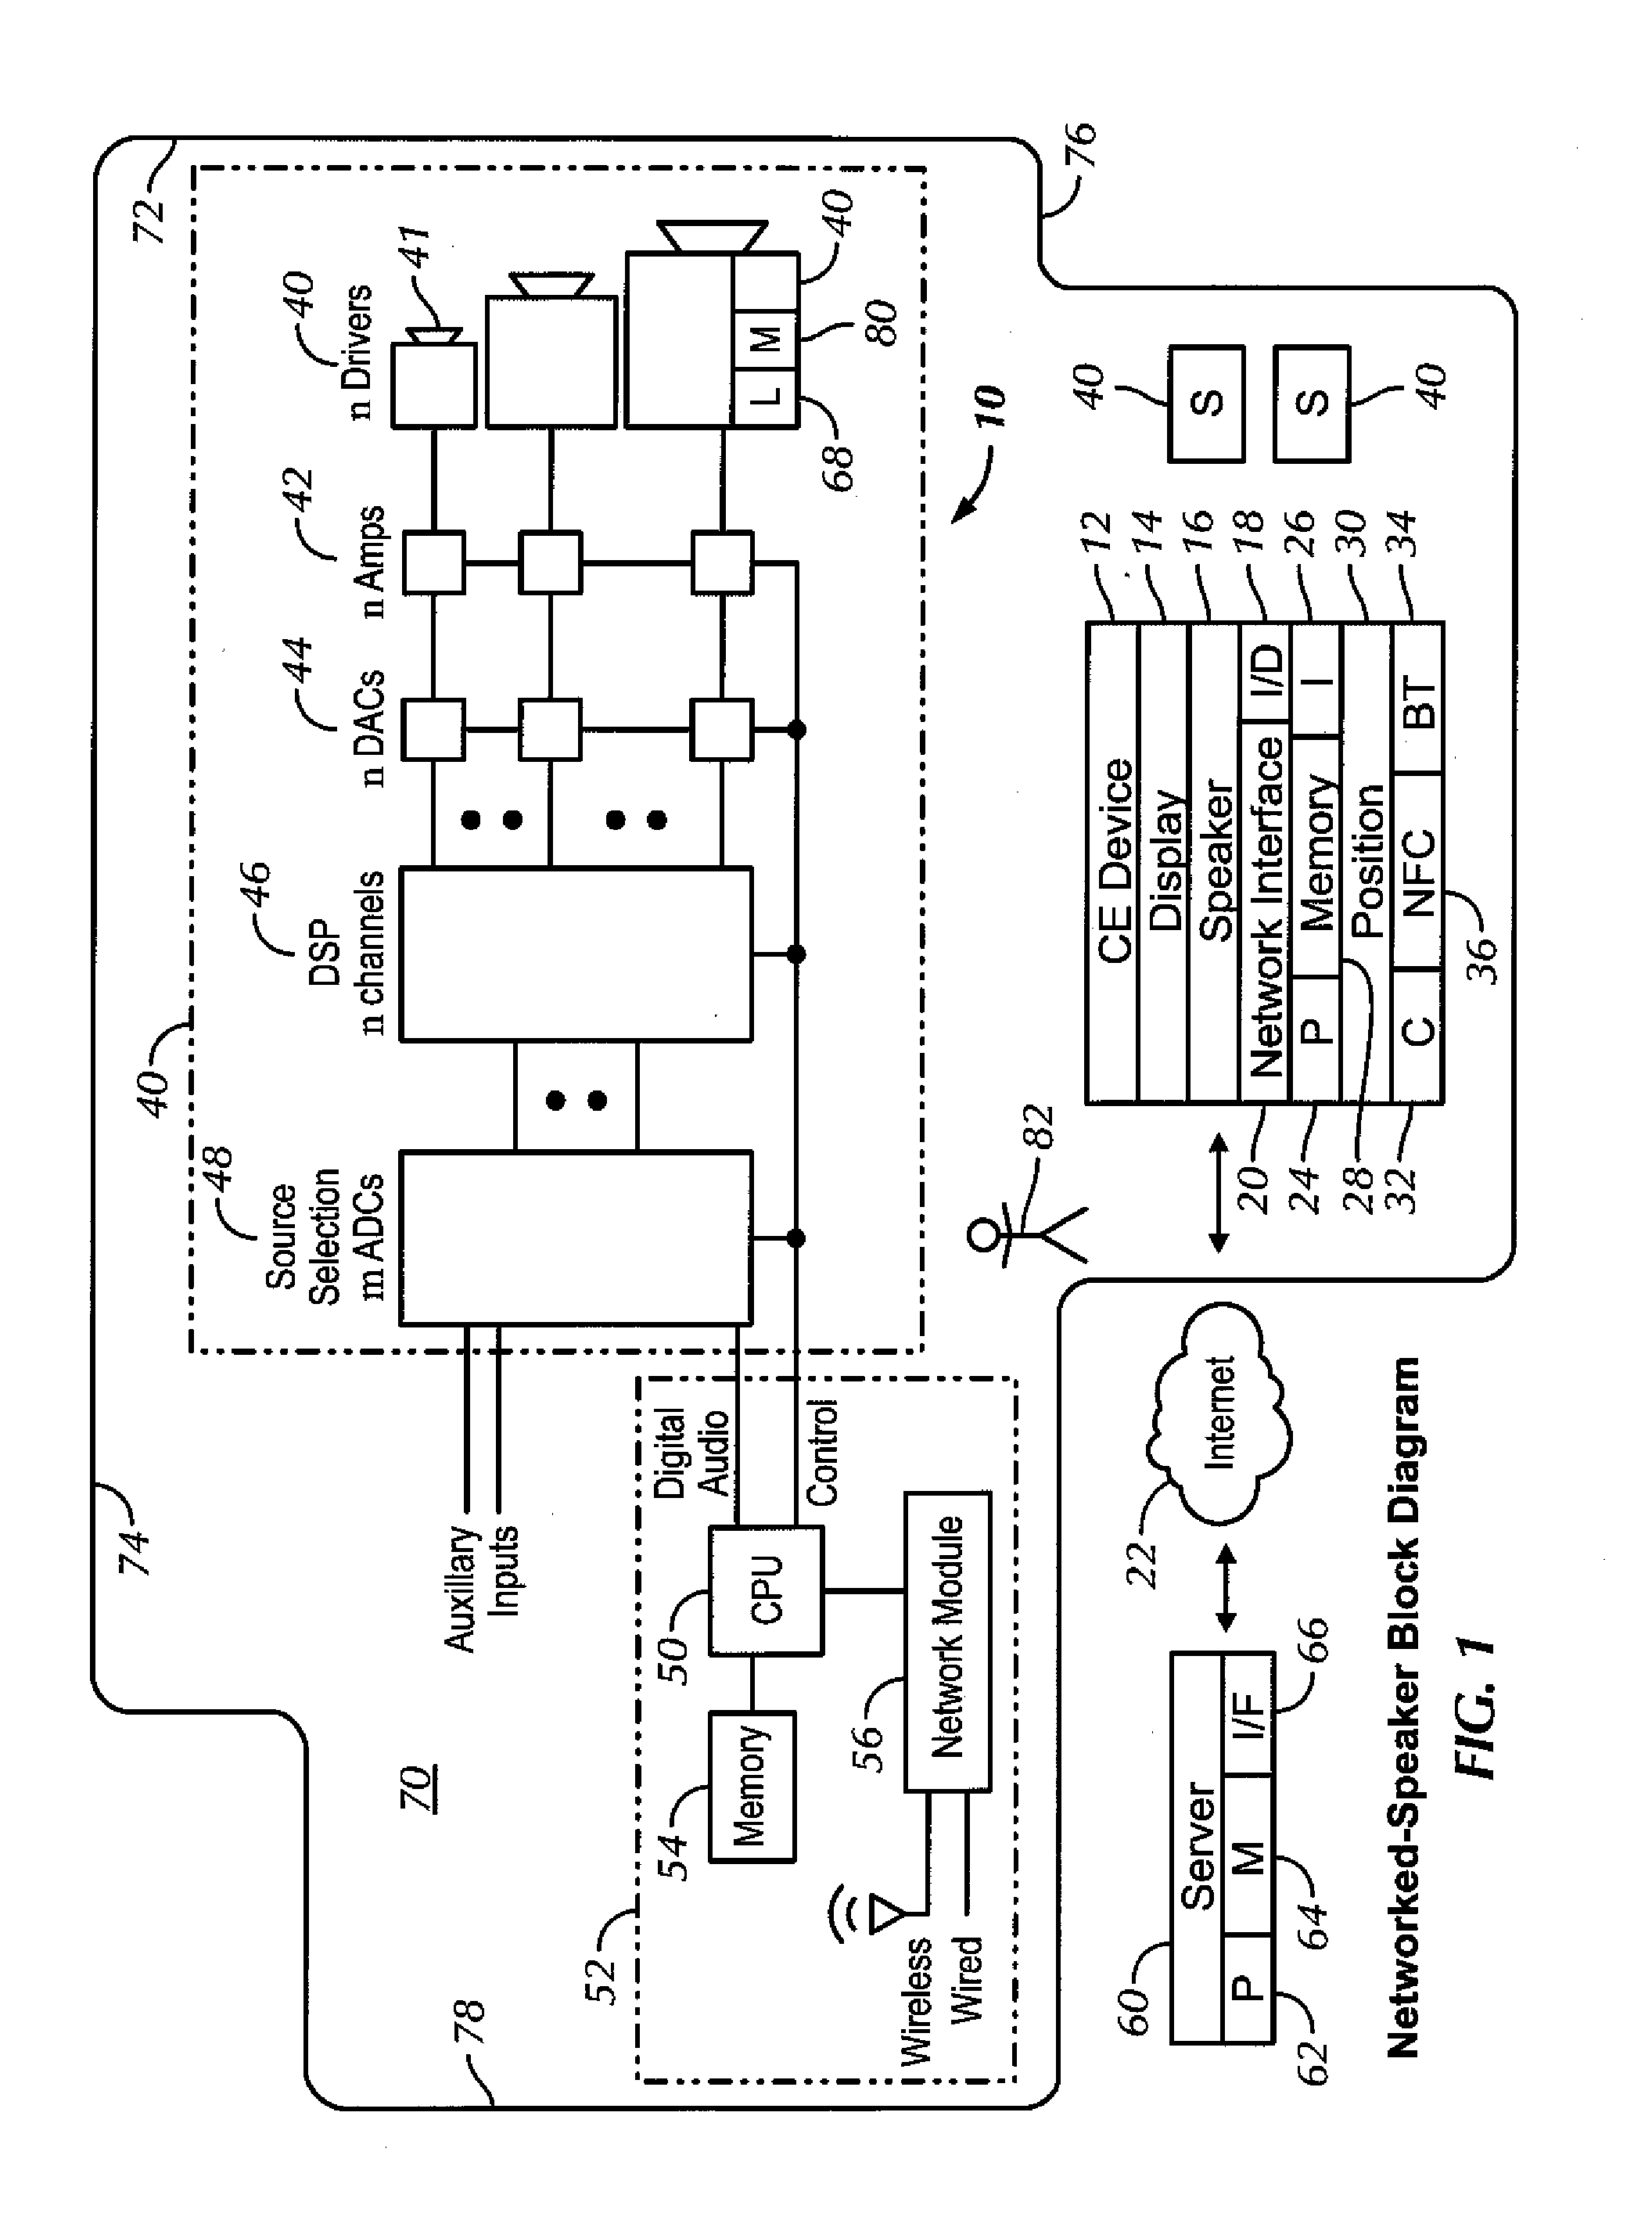 Distributed wireless speaker system with automatic configuration determination when new speakers are added